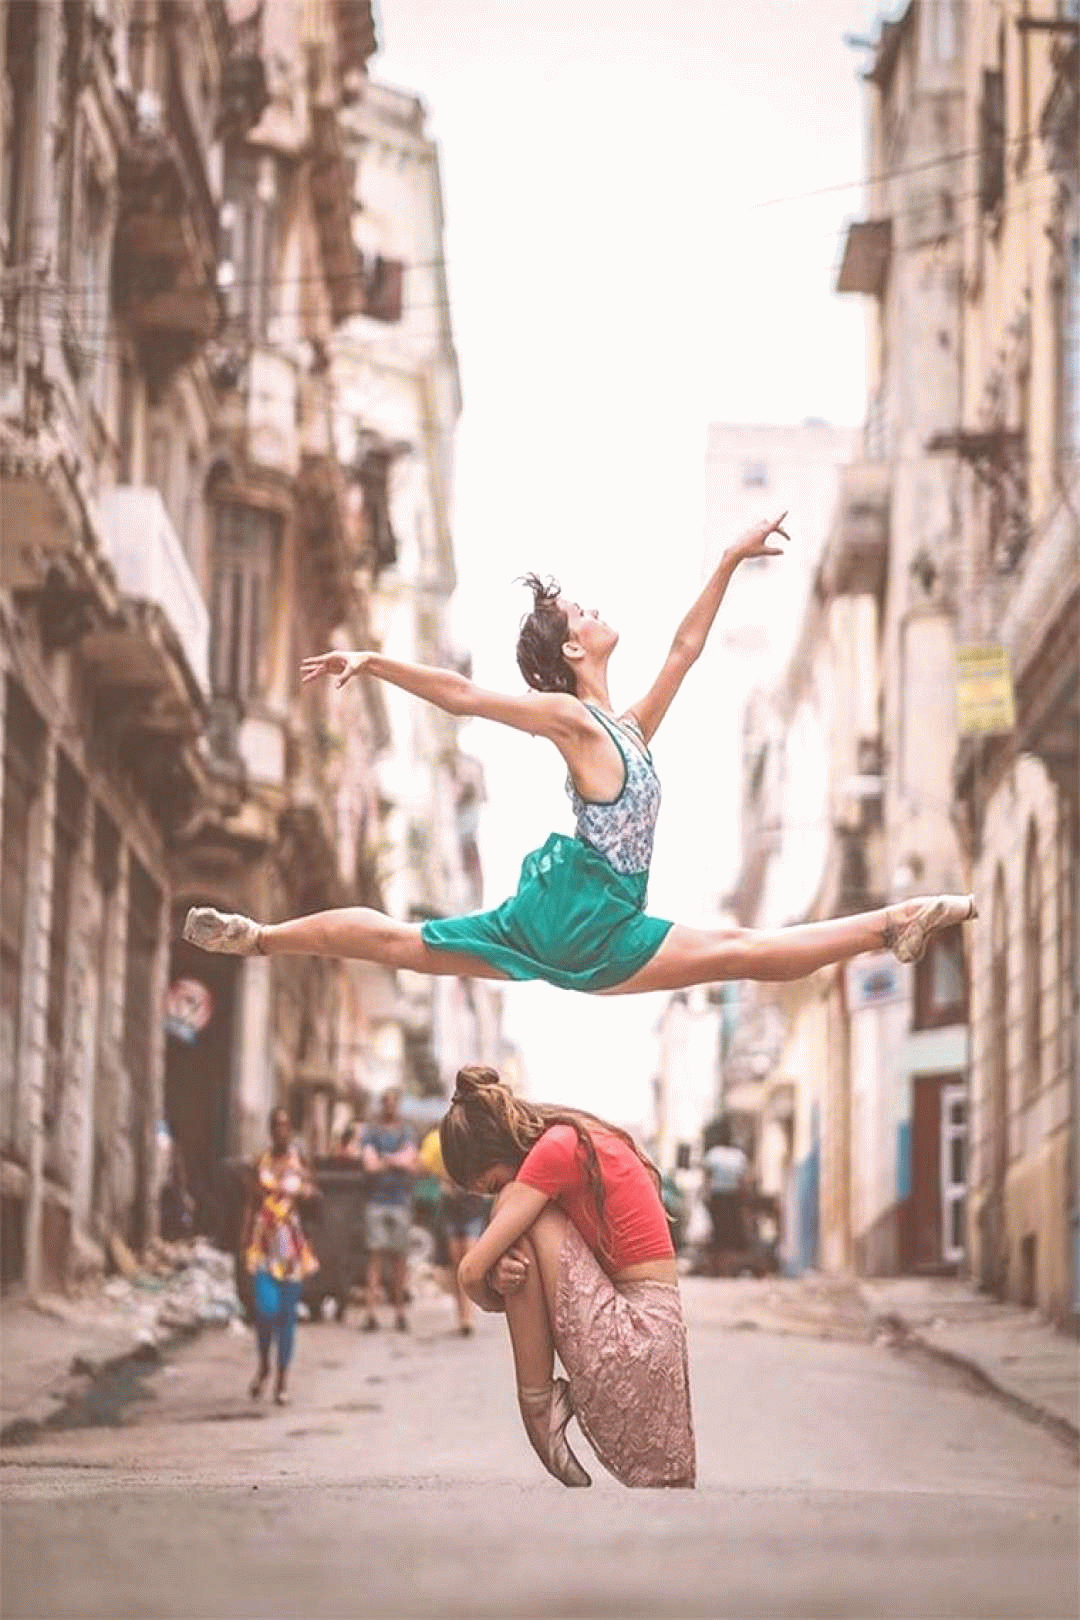 dancers on the streets of cuba a powerful series photos by omar robles stree dance poses ballet photography amazing medium